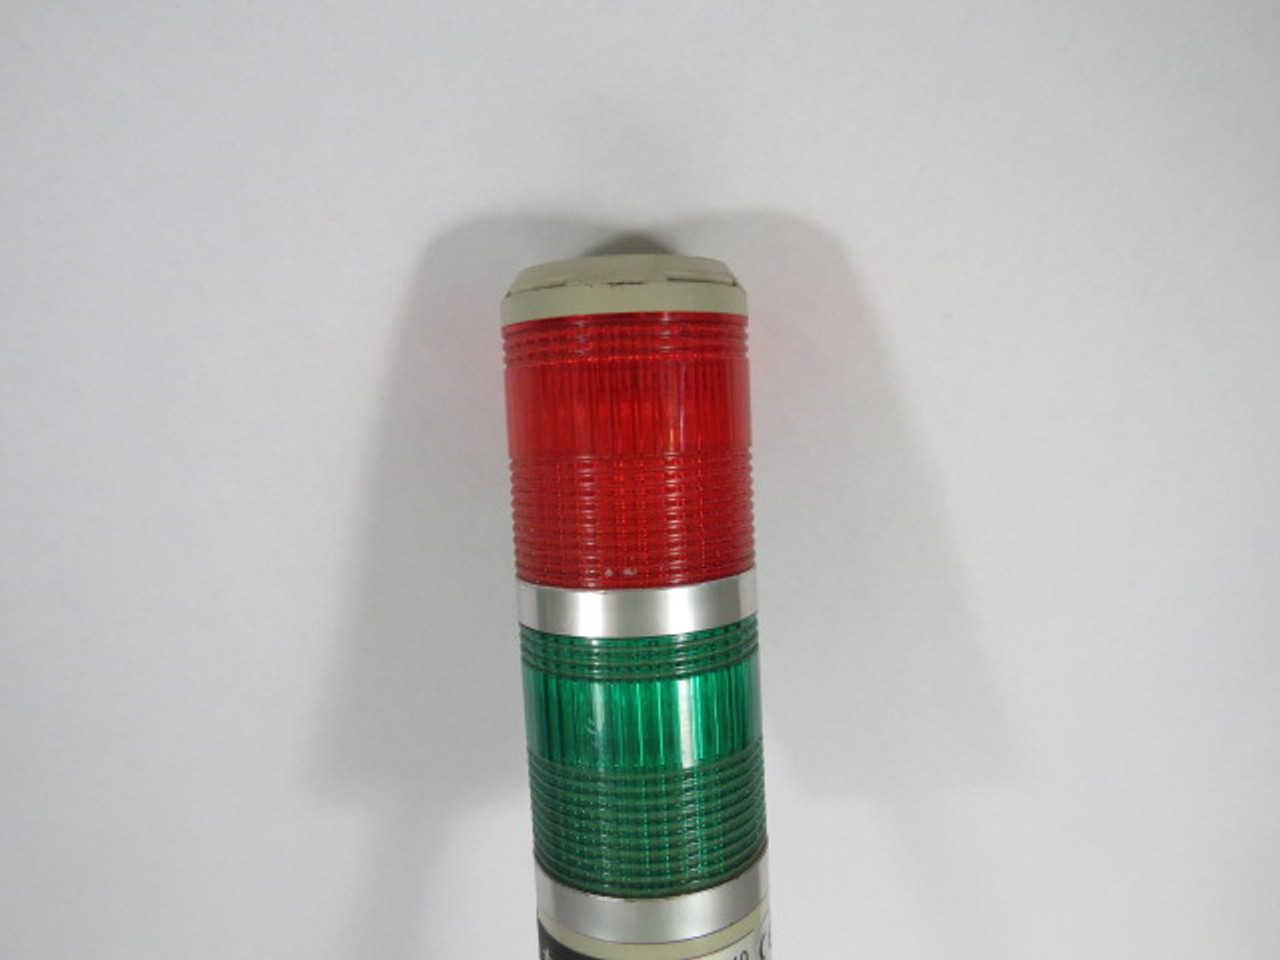 Tend TPTL6-110-RG-S Red/Green Tower Light 60mm Dia 110VAC USED